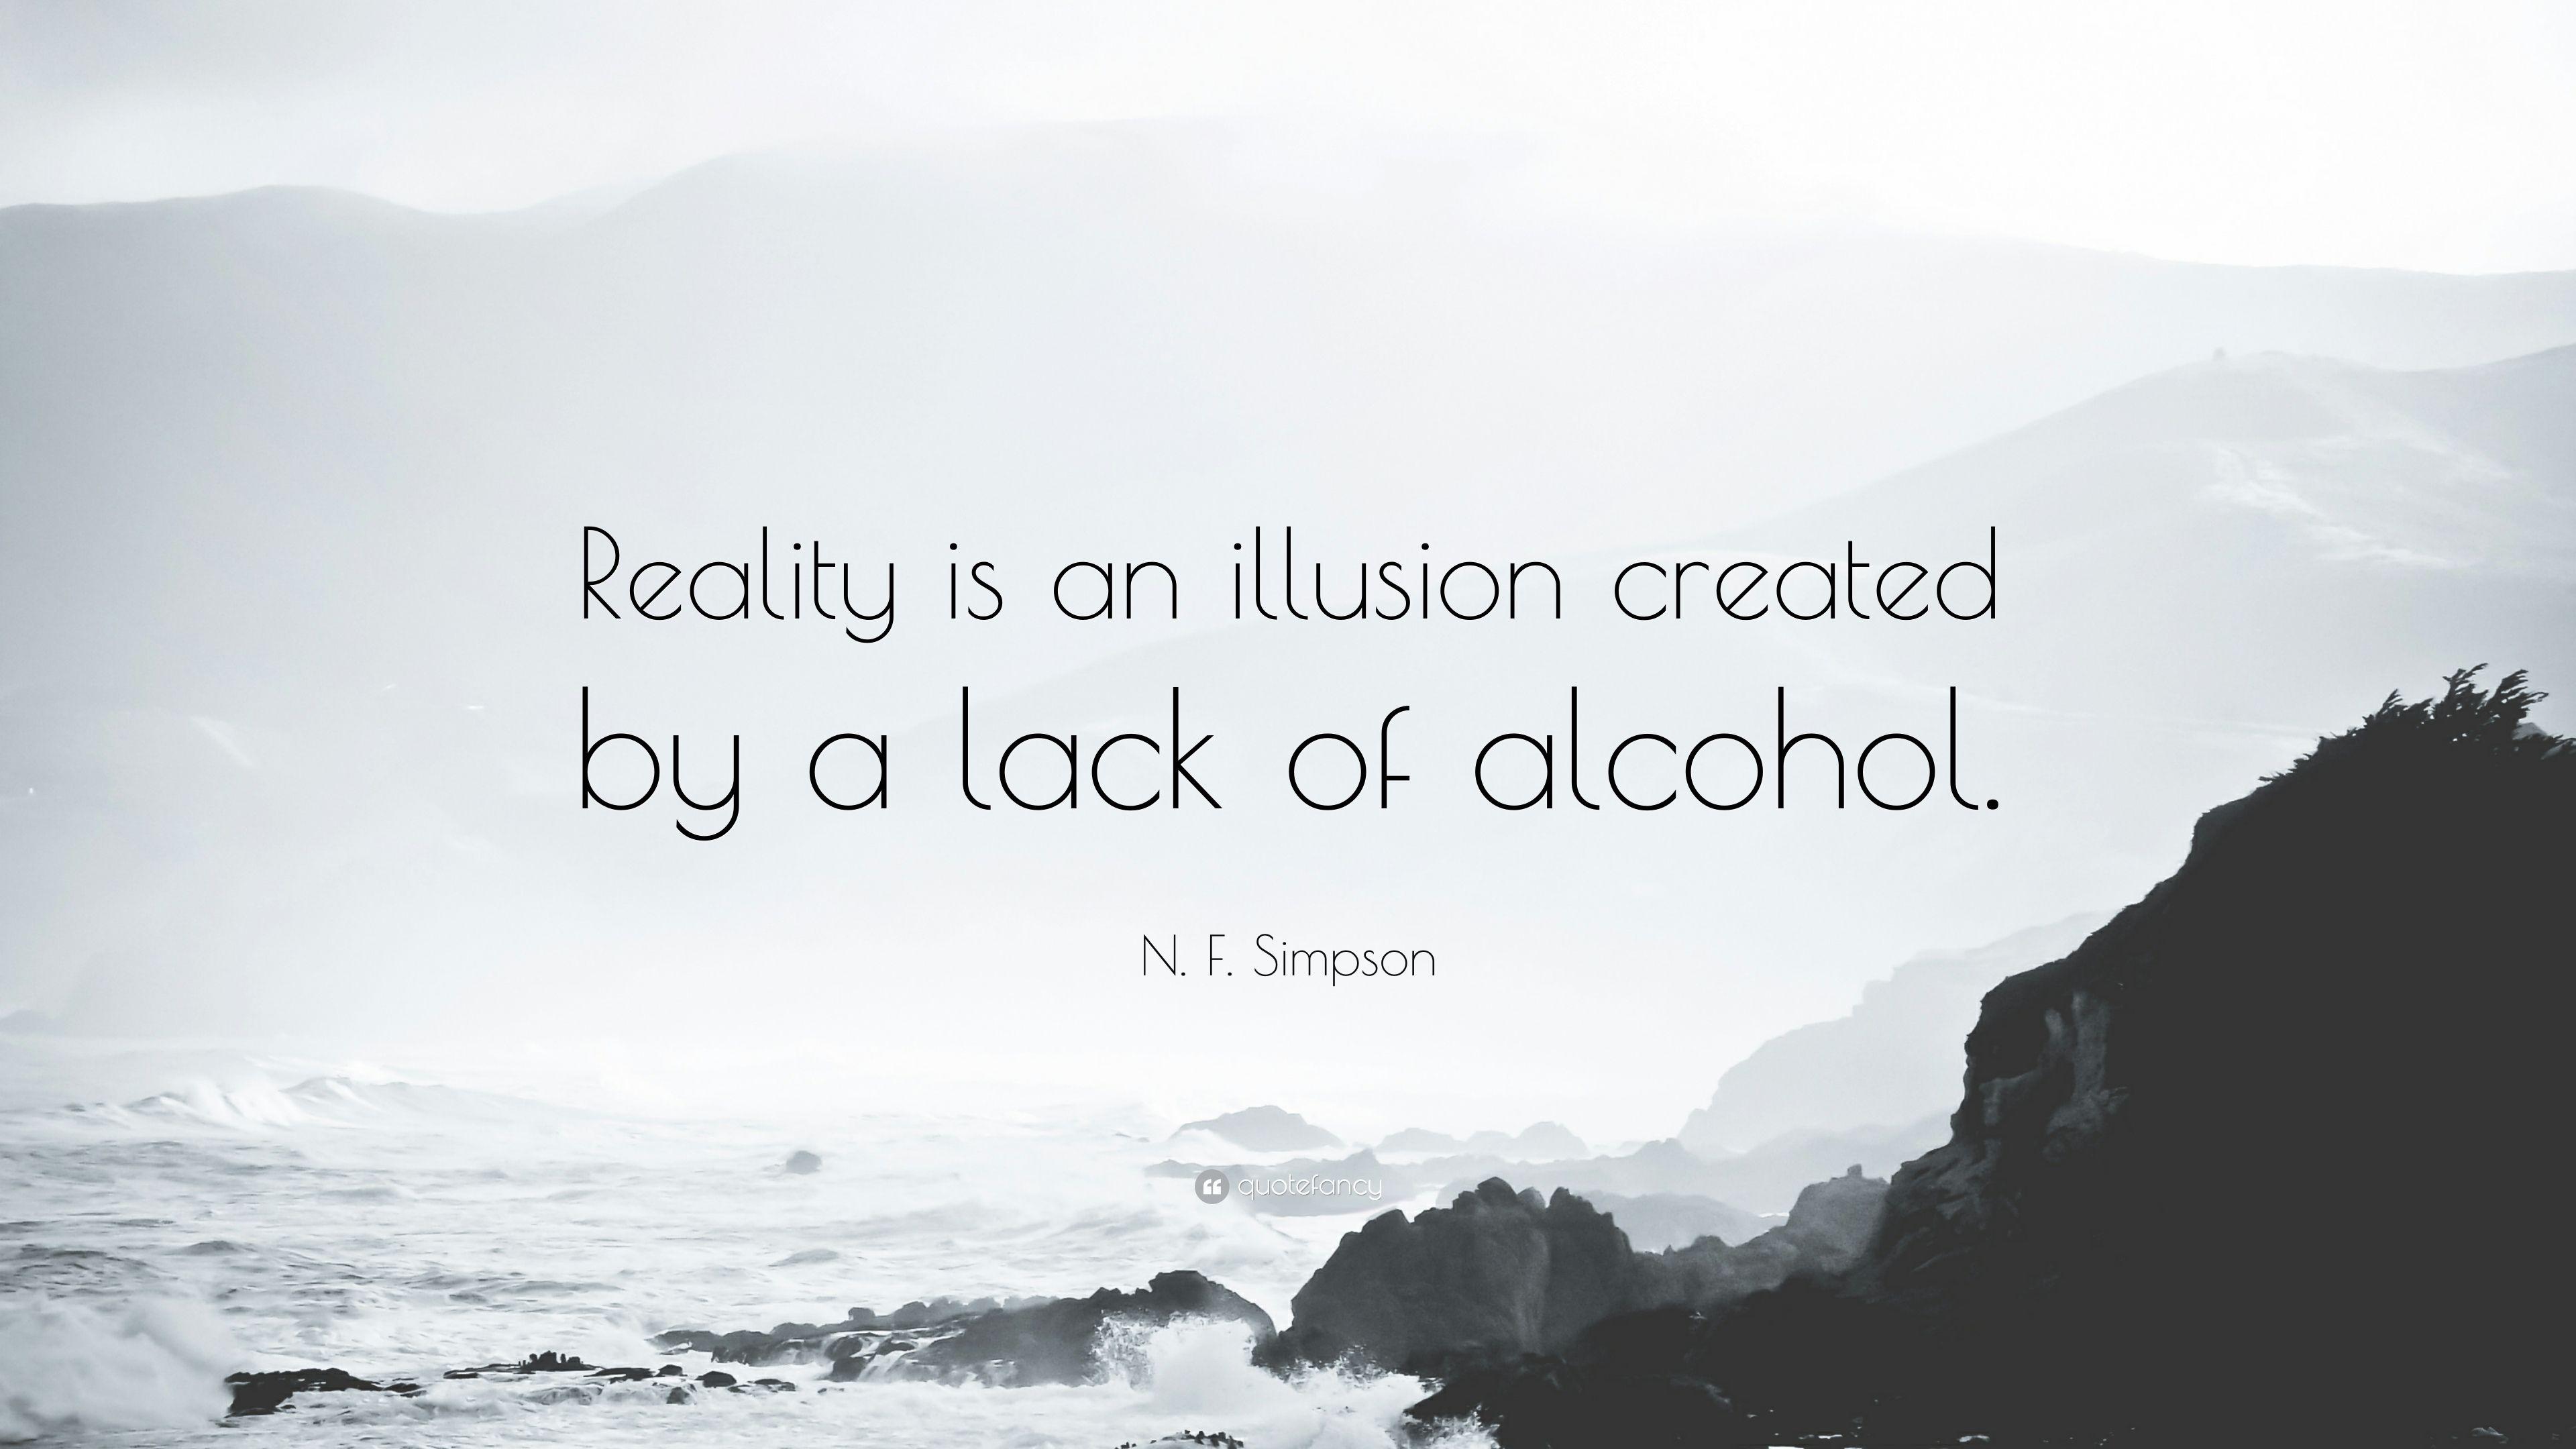 N. F. Simpson Quote: “Reality is an illusion created